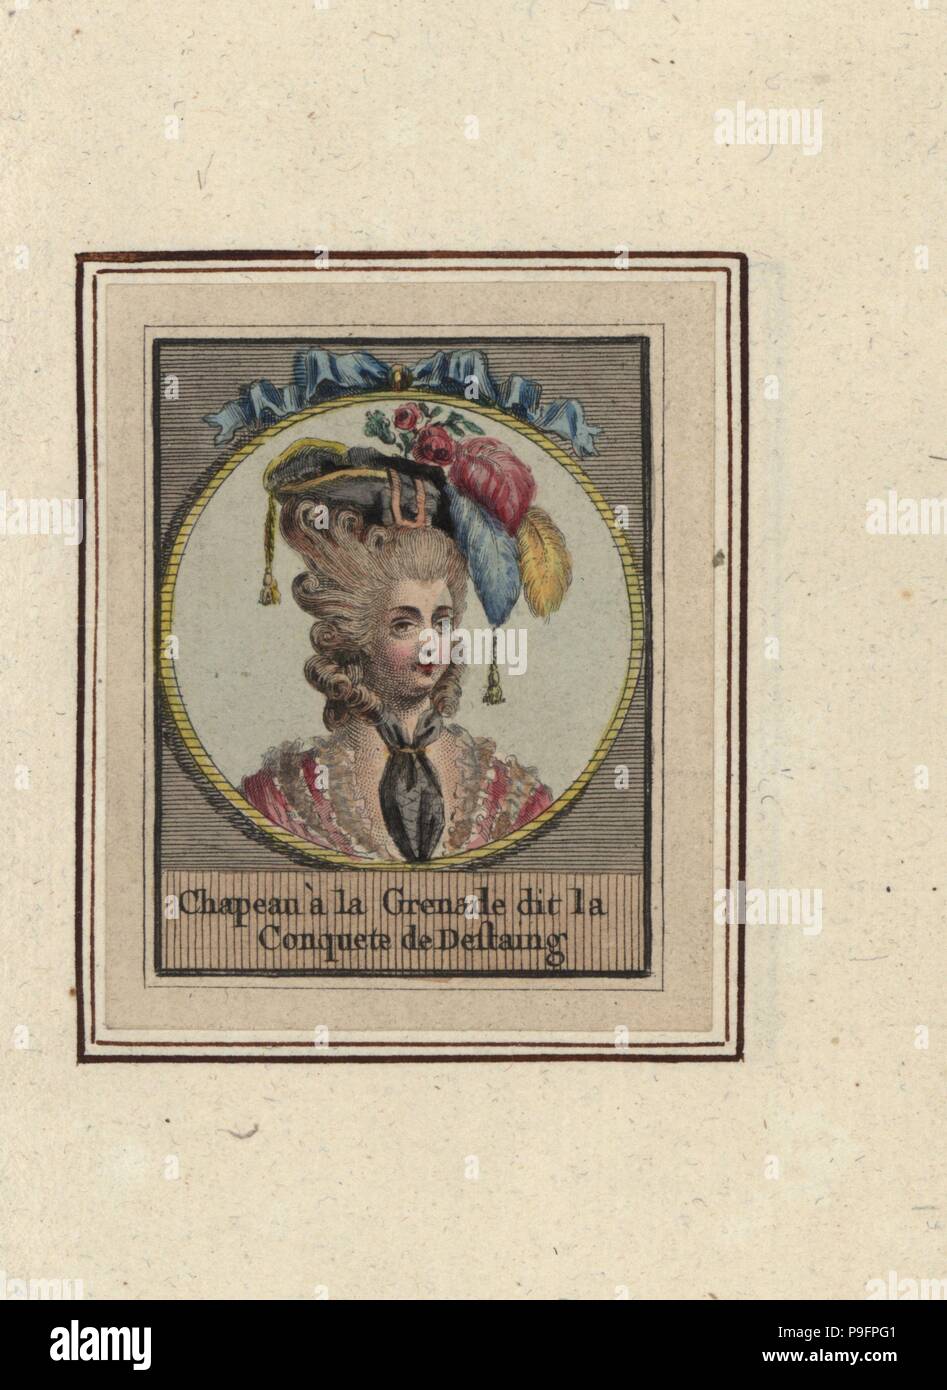 Woman in grenadier's bicorn called the Victory of d'Estaing, after French naval hero Charles Hector, comte d'Estaing. Chapeau a la Grenade dit la Conquete de Destaing; Handcoloured copperplate engraving by an unknown artist from an Album of Fashionable Hairstyles of 1783, Suite des Coeffures a la Mode en 1783, Esnauts et Rapilly, Paris, 1783. Stock Photo